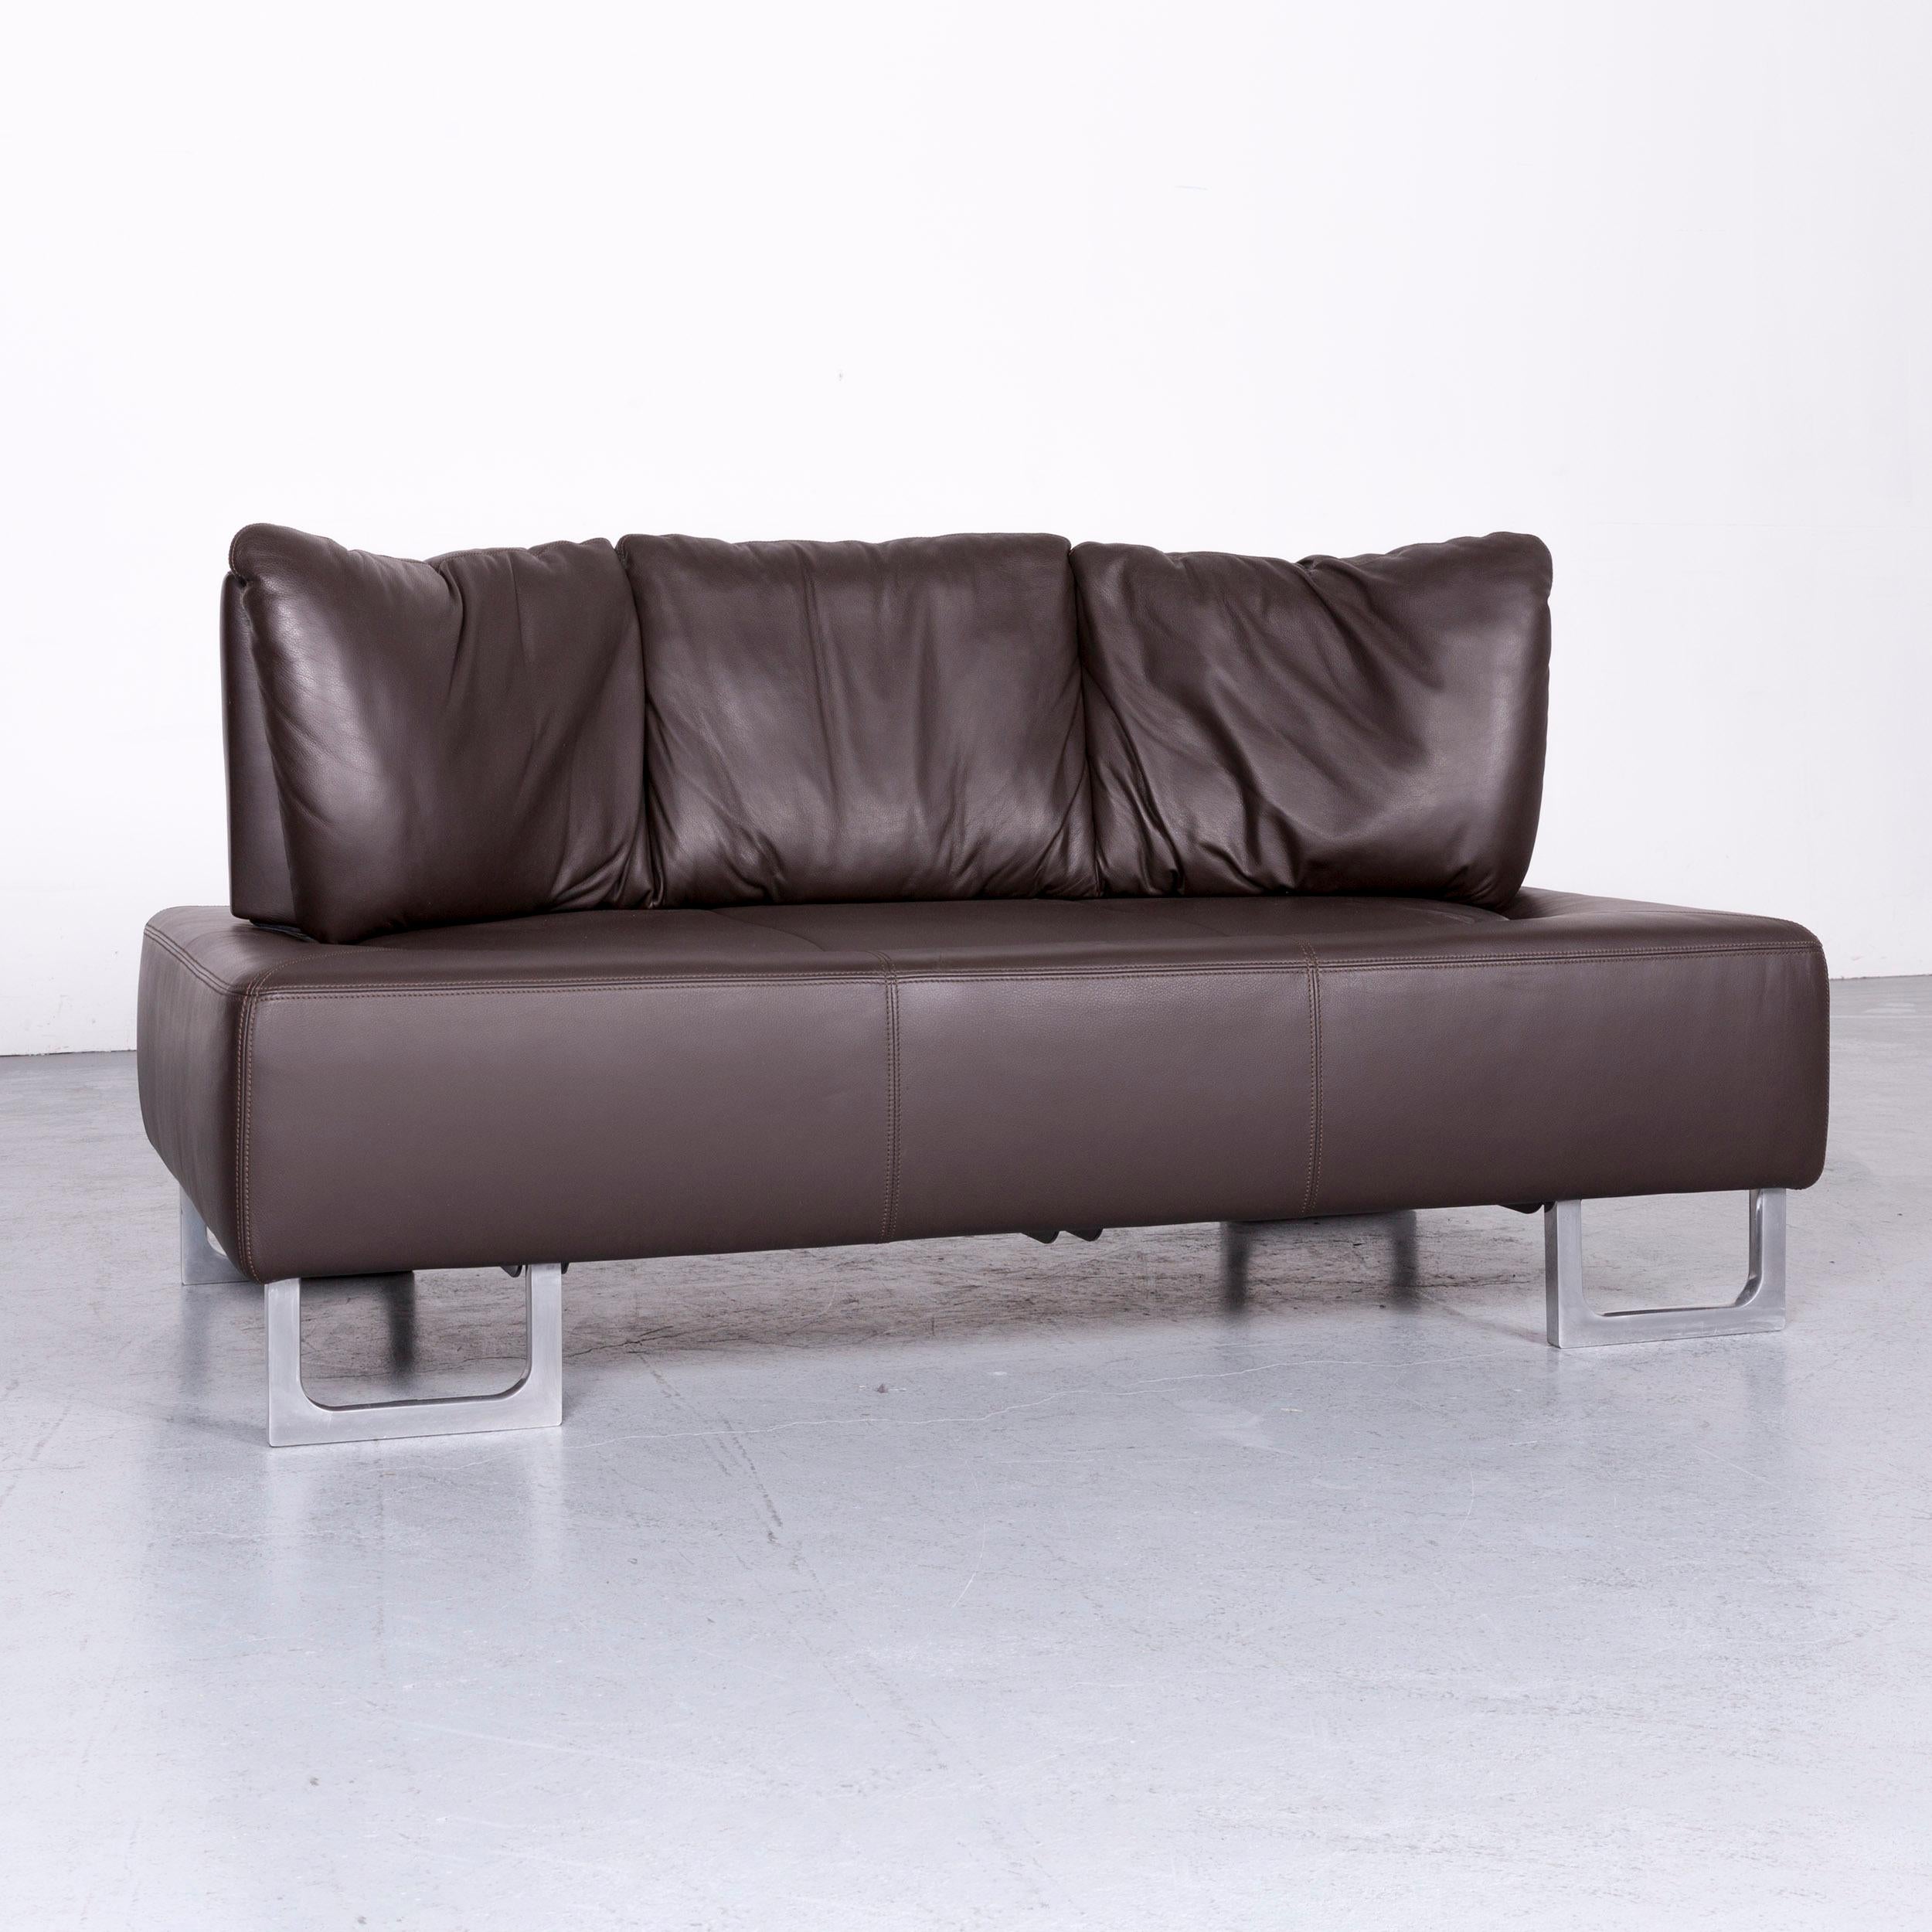 We bring to you a De Sede DS 165 designer leather sofa brown two-seat couch.

































